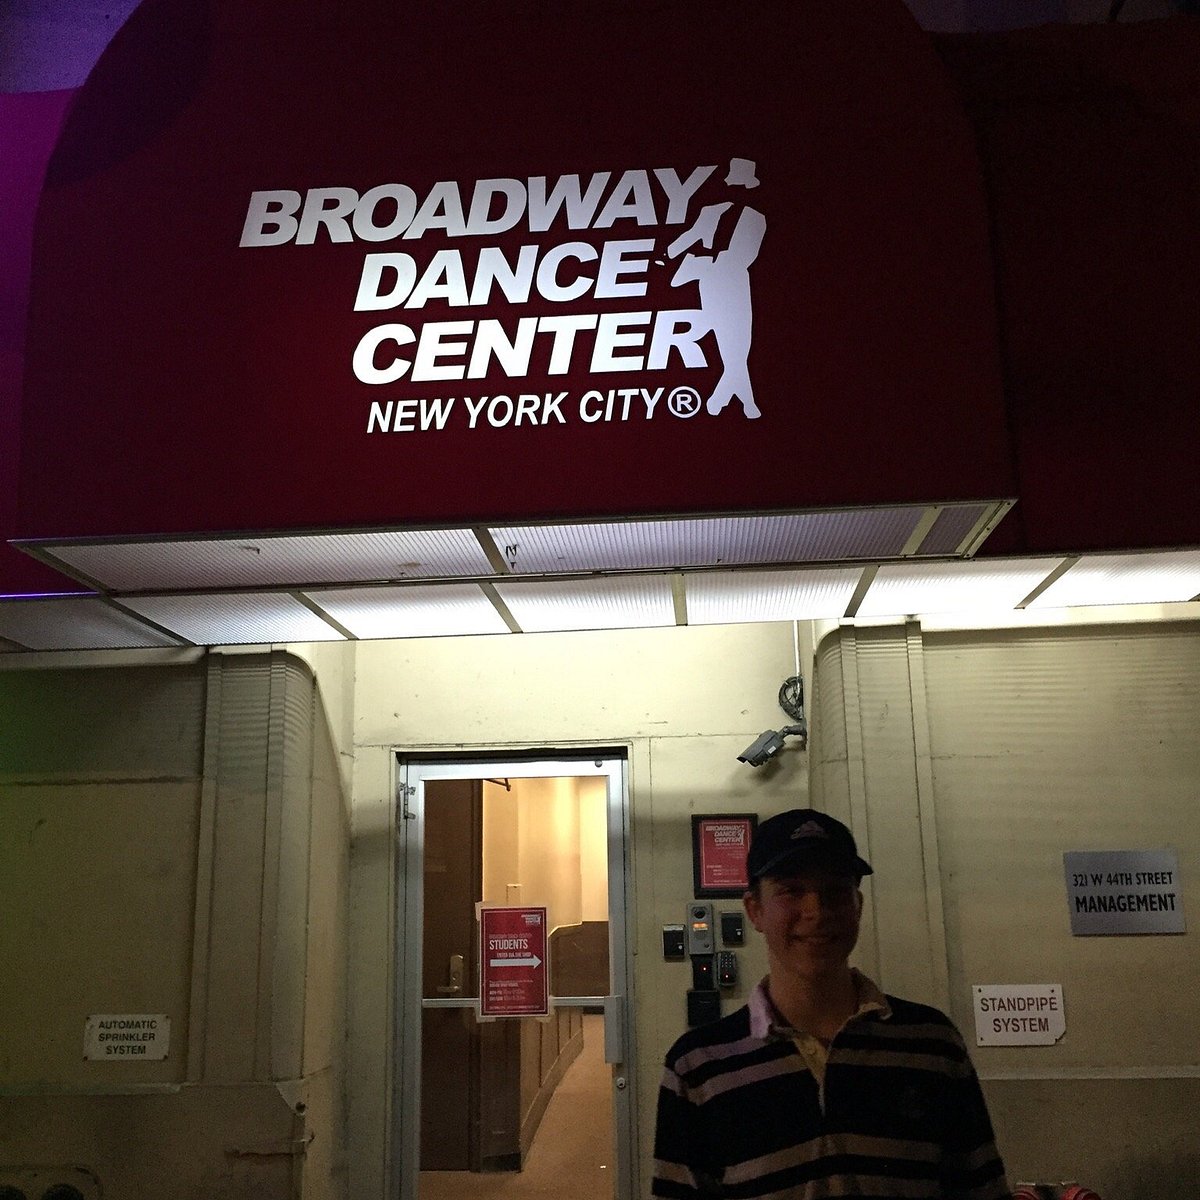 Broadway Dance Center New York City All You Need To Know Before You Go